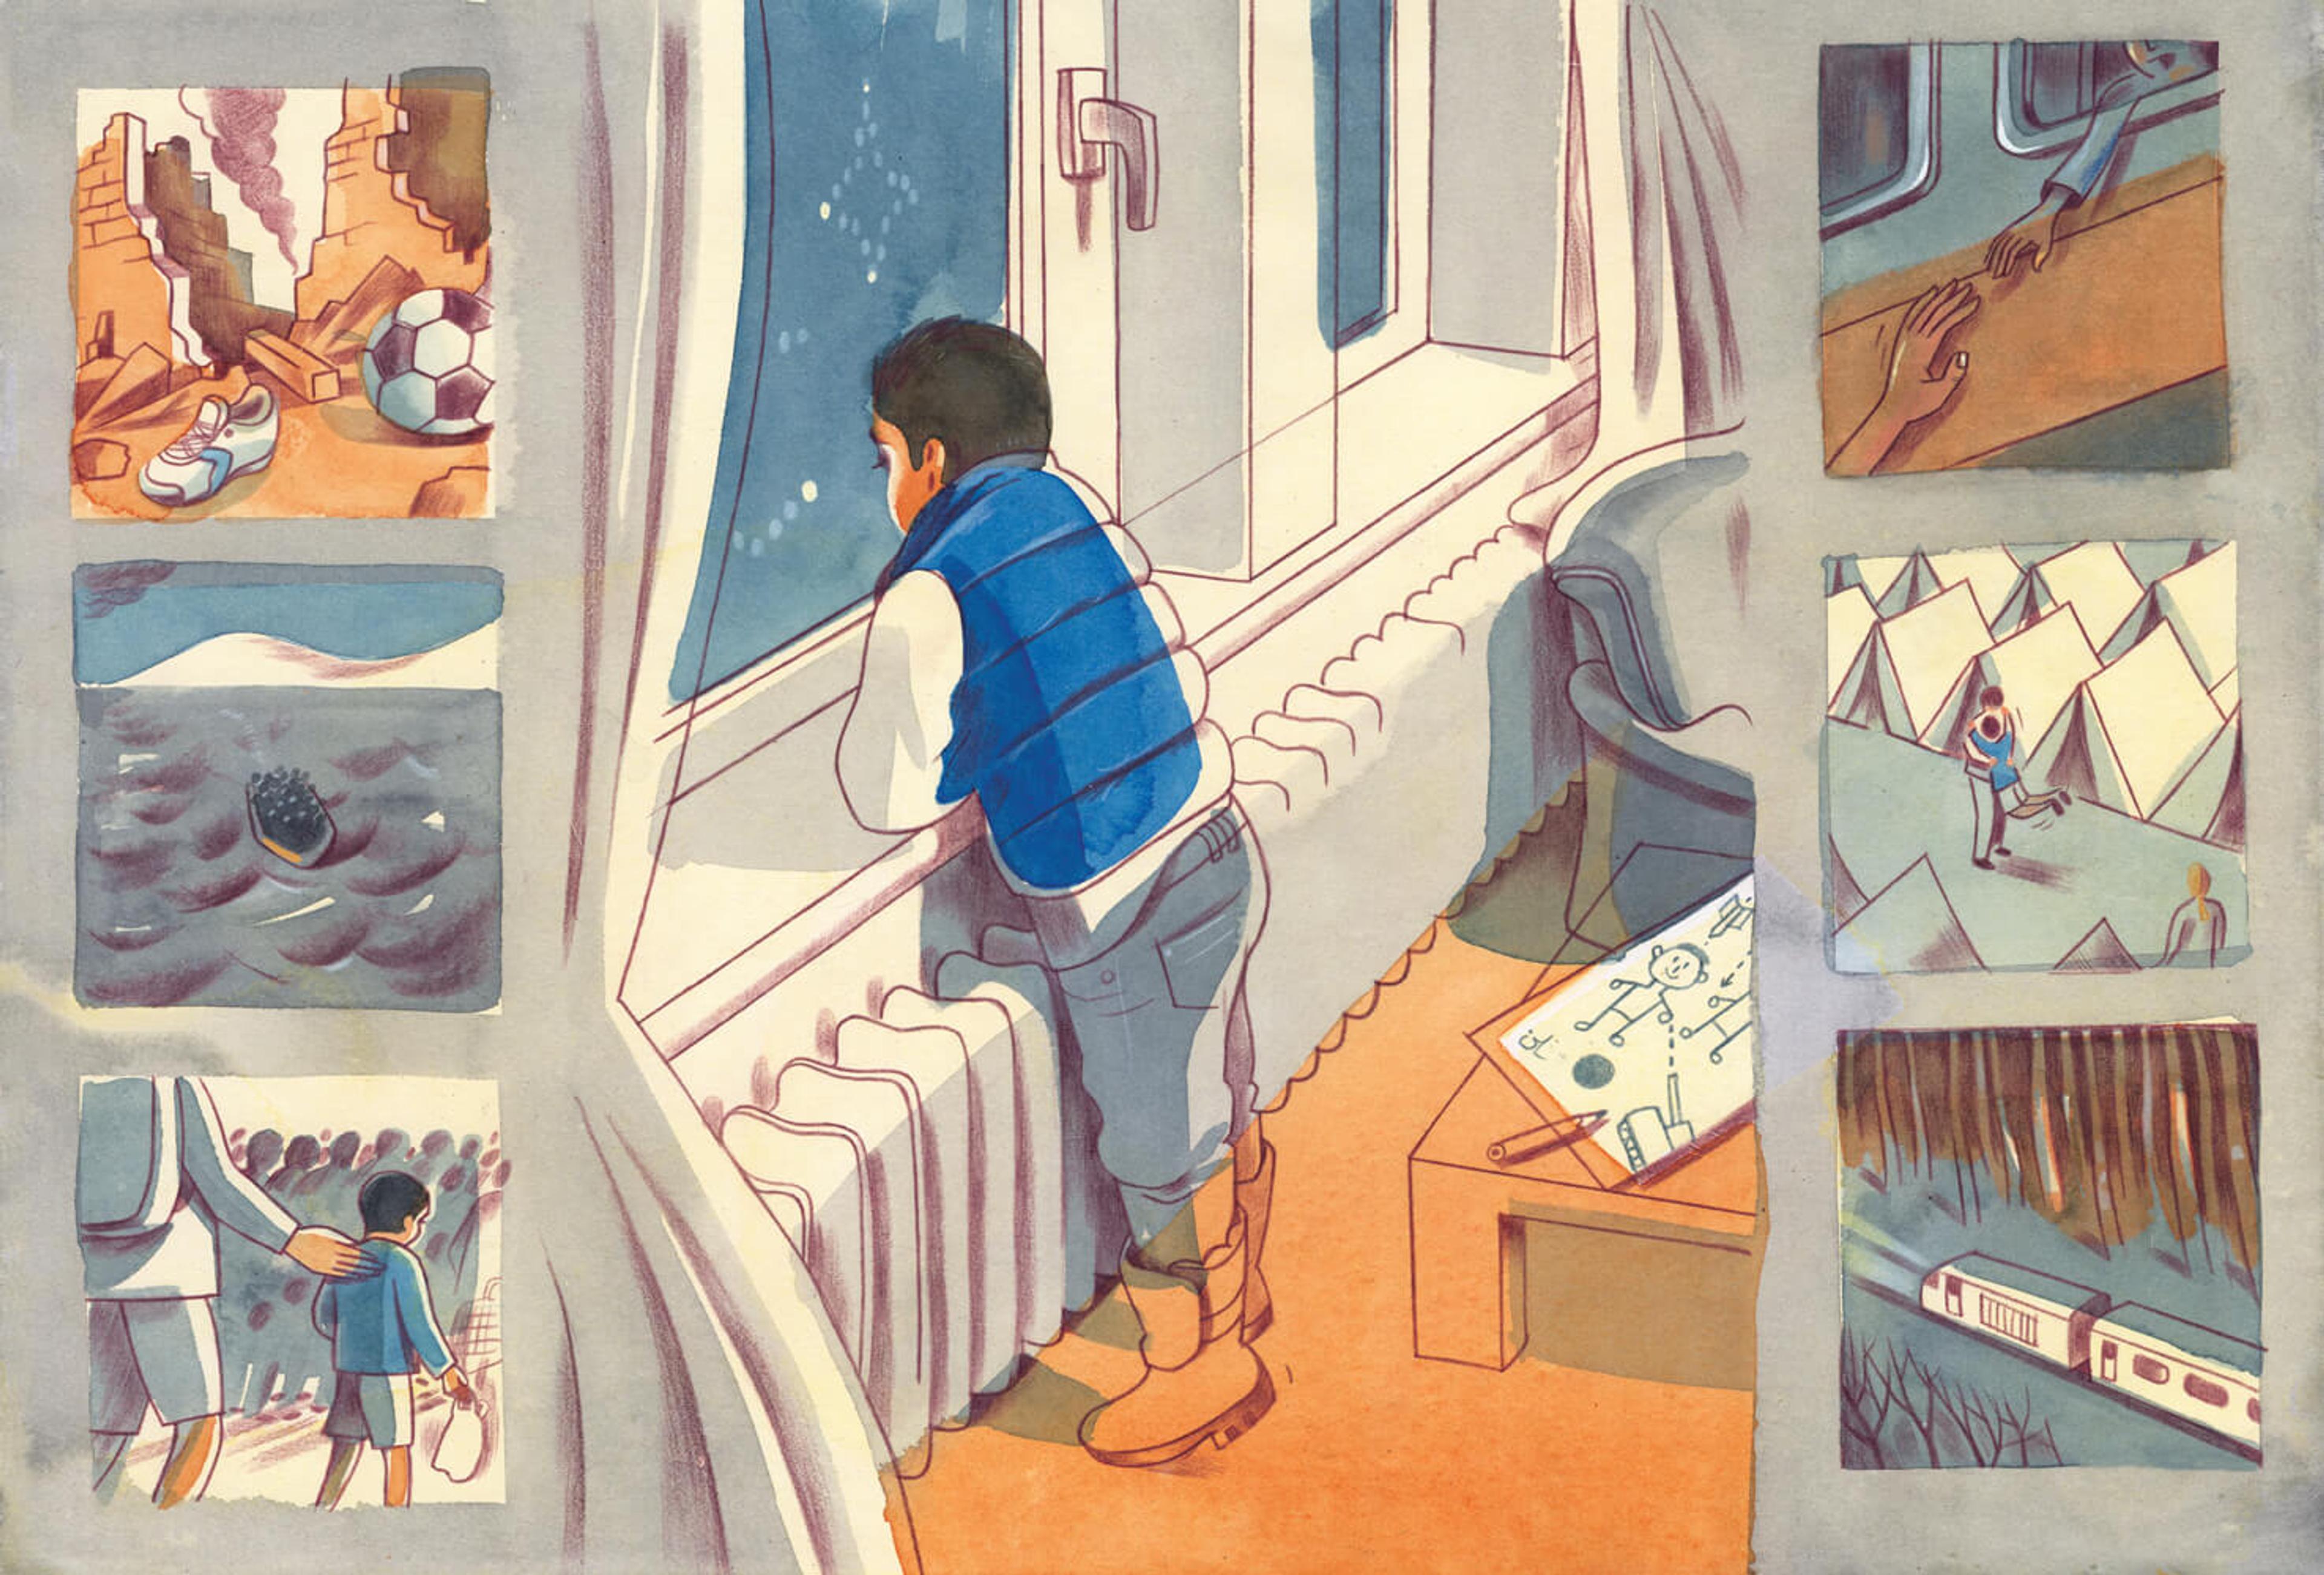 Comic of a child looking out of a window. Panels surrounding this central image depict the child's memories of refugee camps, boats and trains